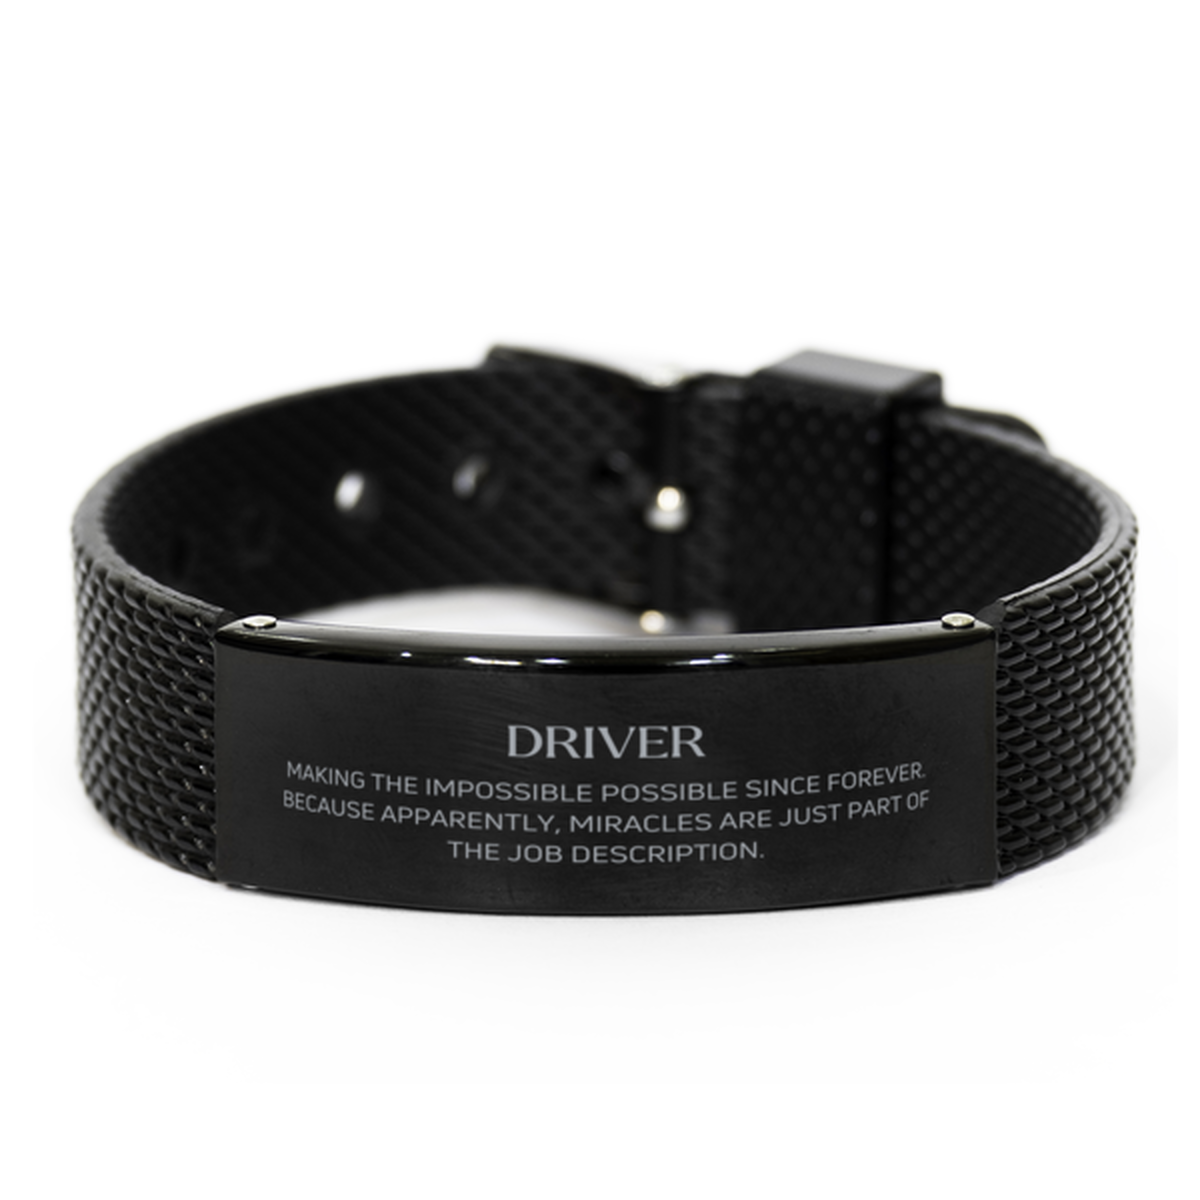 Funny Driver Gifts, Miracles are just part of the job description, Inspirational Birthday Black Shark Mesh Bracelet For Driver, Men, Women, Coworkers, Friends, Boss